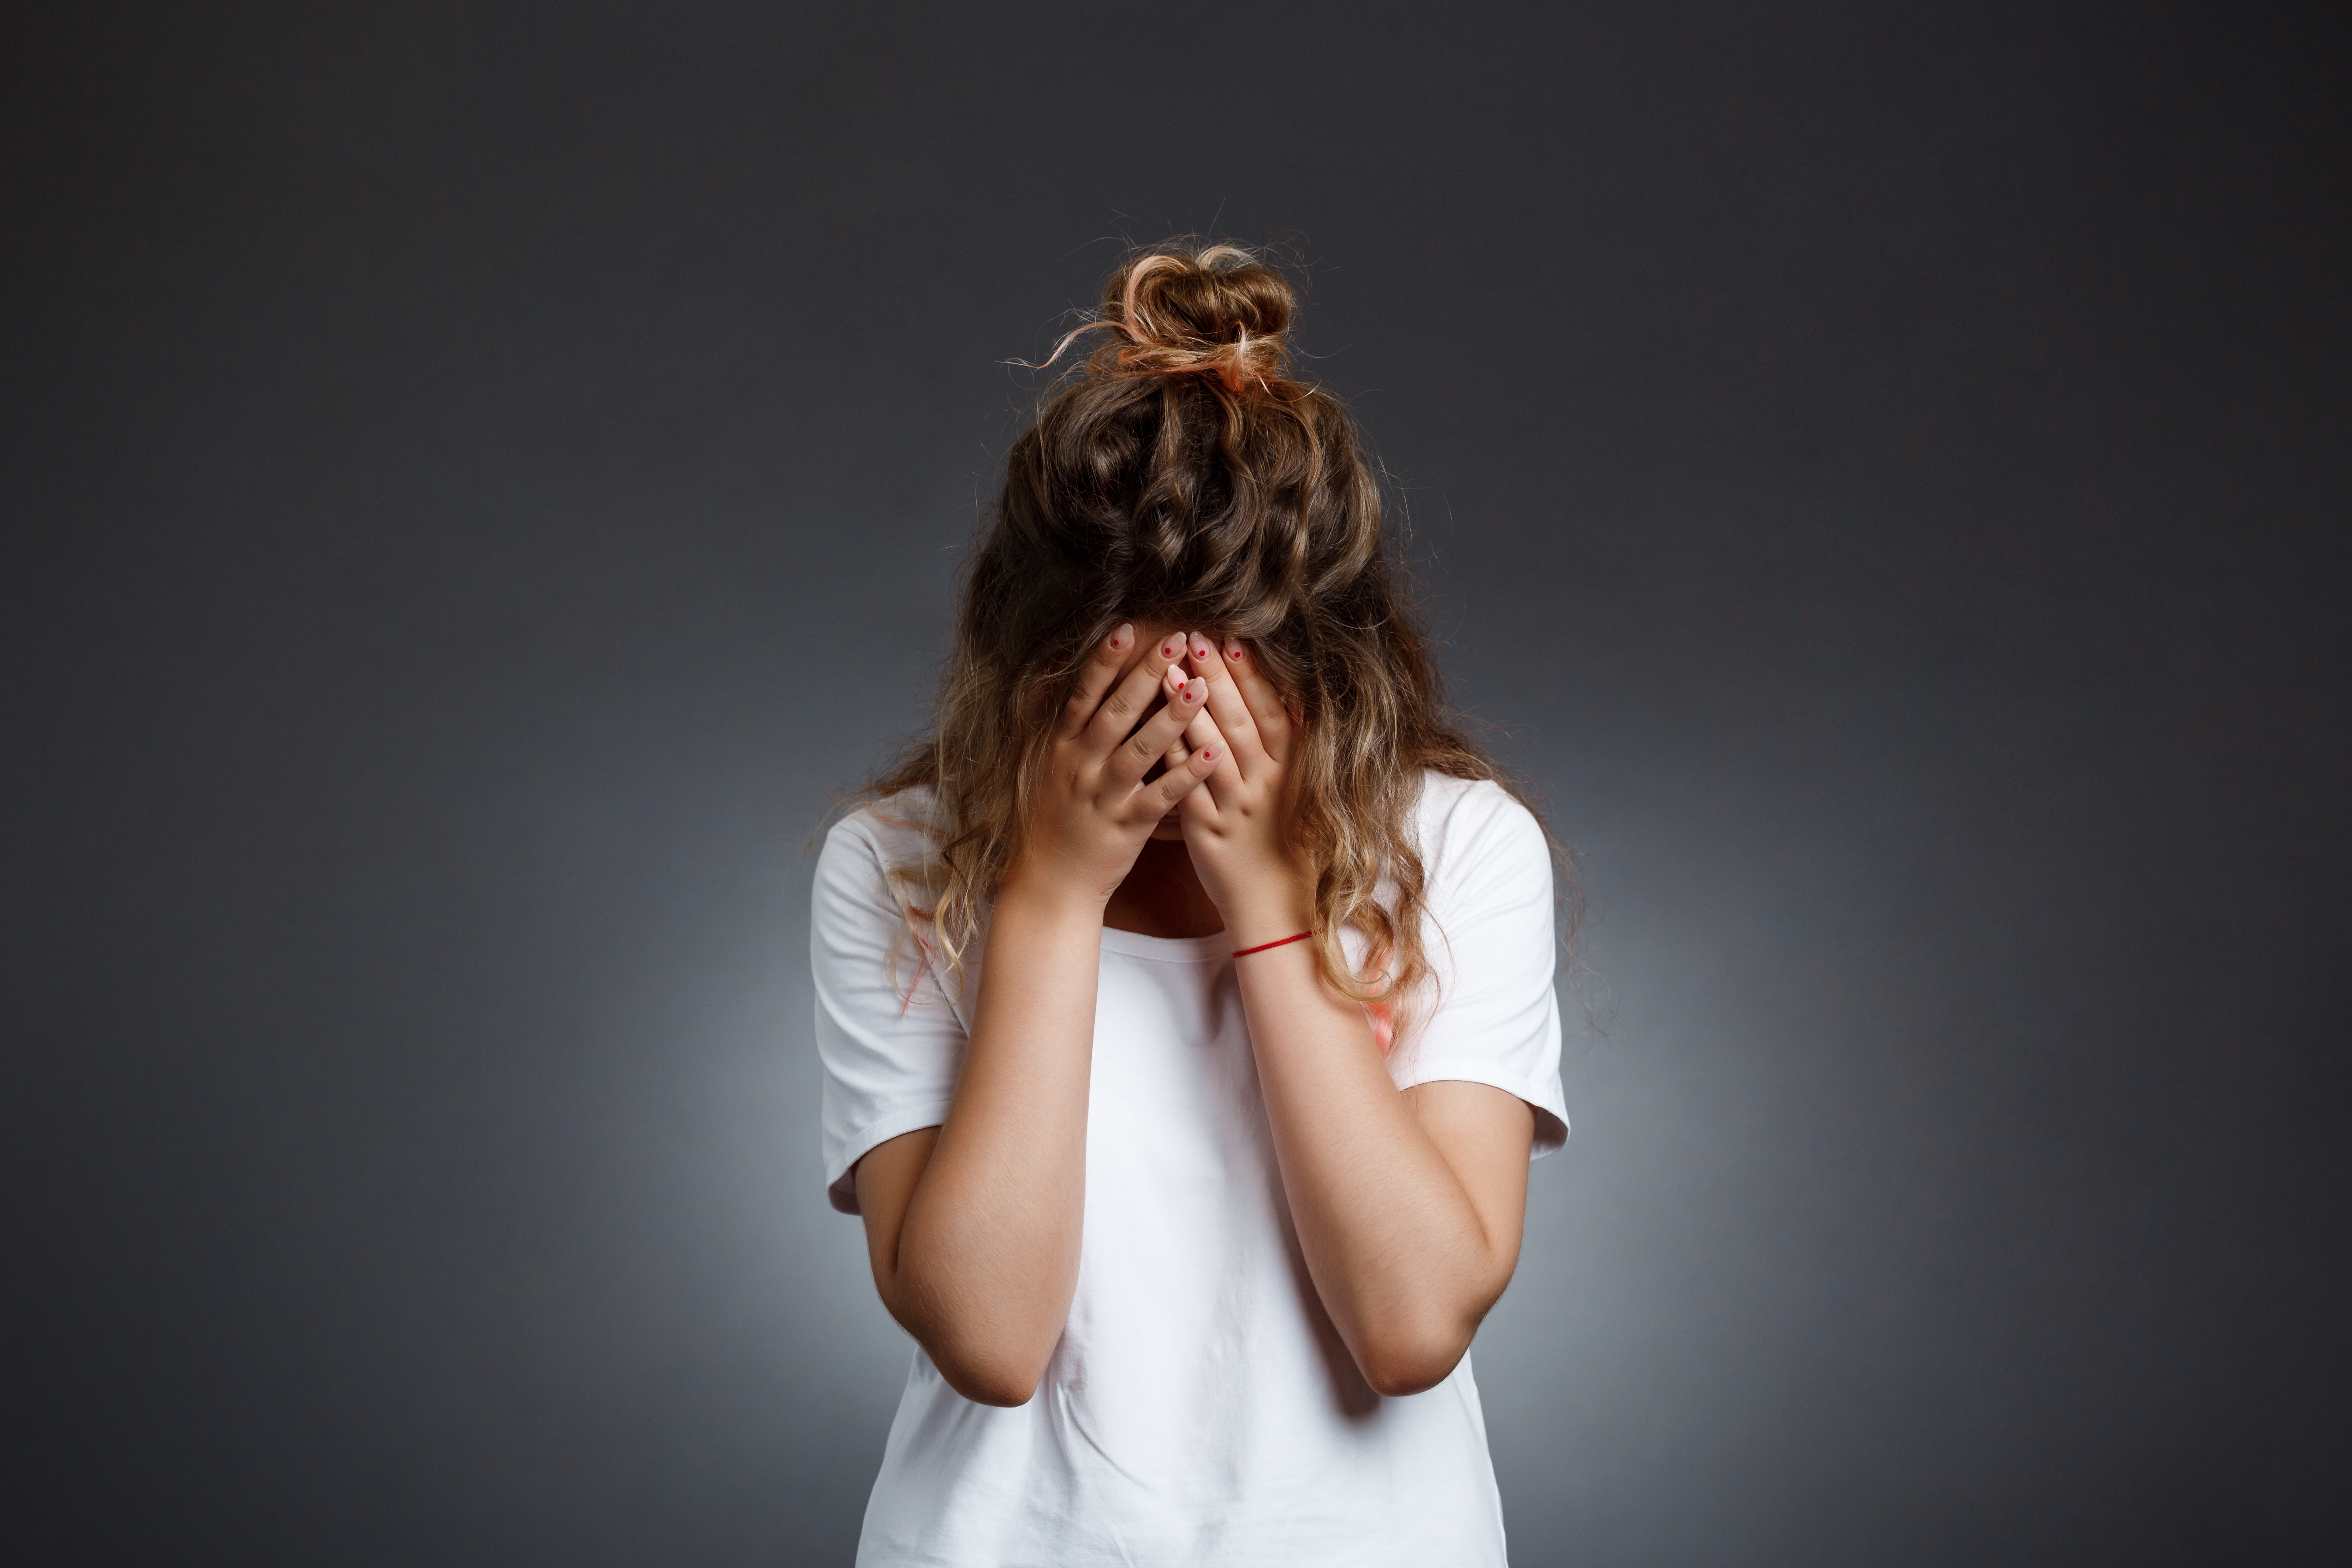 An upset woman with her head in her hands | Source: Shutterstock